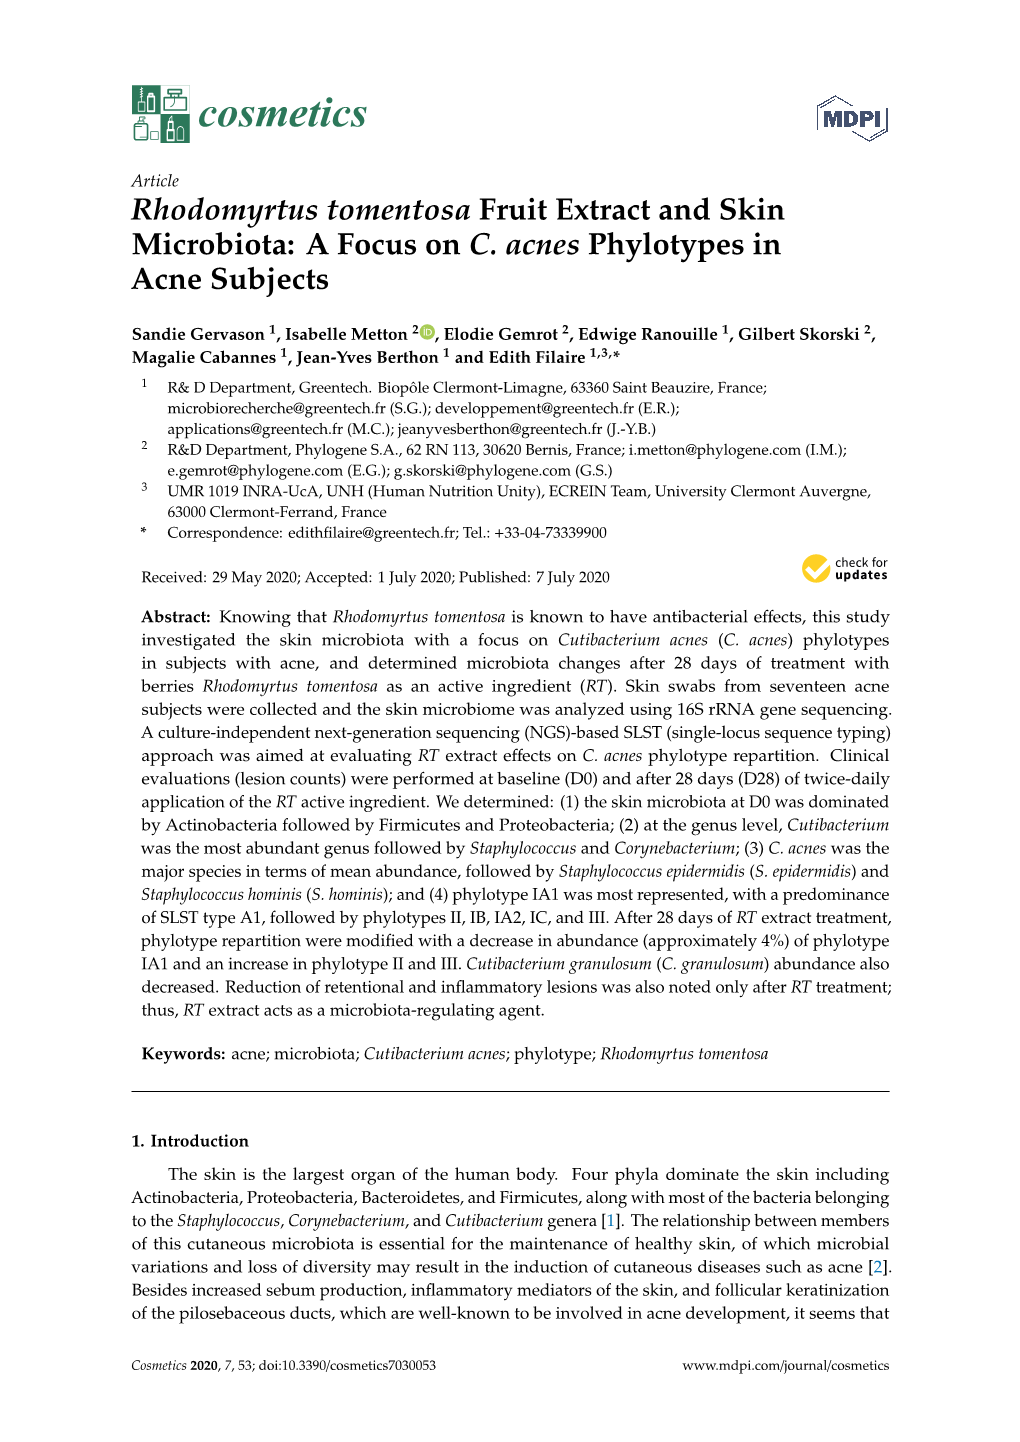 Rhodomyrtus Tomentosa Fruit Extract and Skin Microbiota: a Focus on C